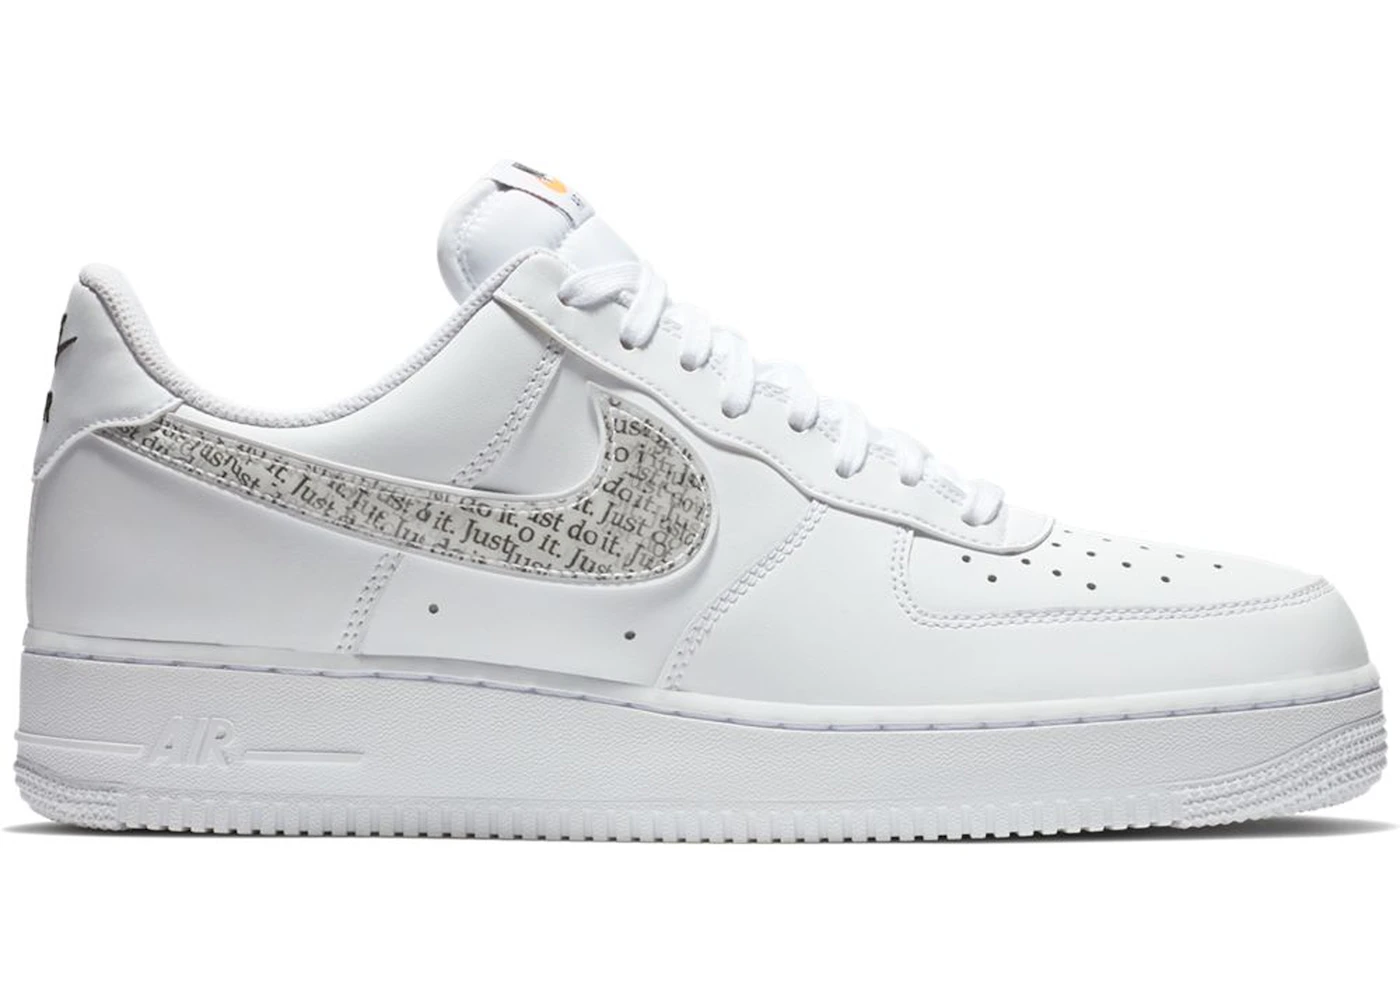 threat wasteland solidarity Nike Air Force 1 Low Just Do It Pack White Clear - BQ5361-100 - US